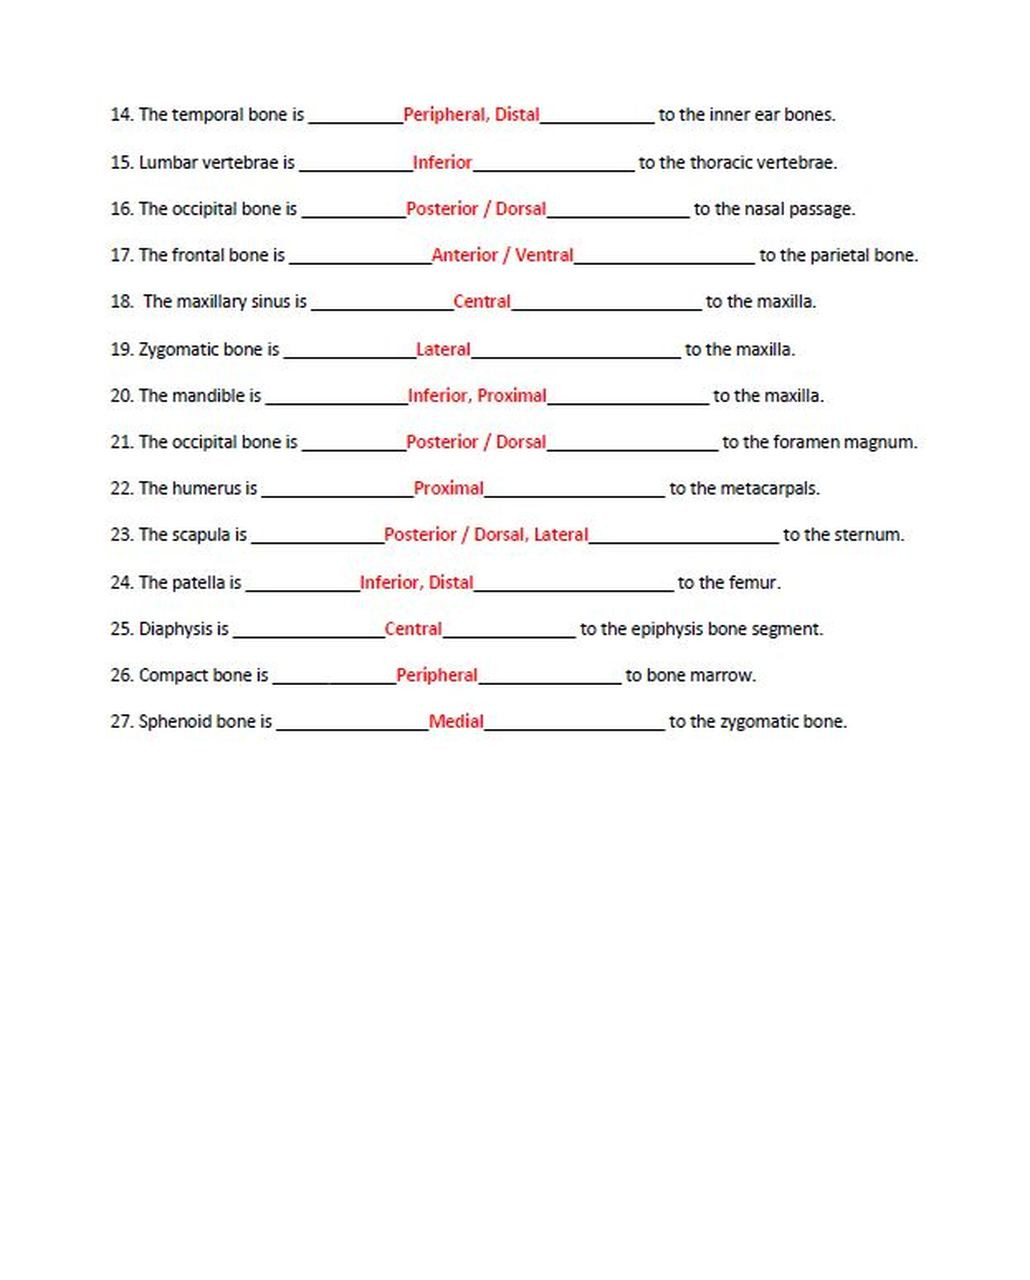 Anatomical Terms Worksheet Answers Anatomical Position Naming Practice Between Bones In the Skeletal System